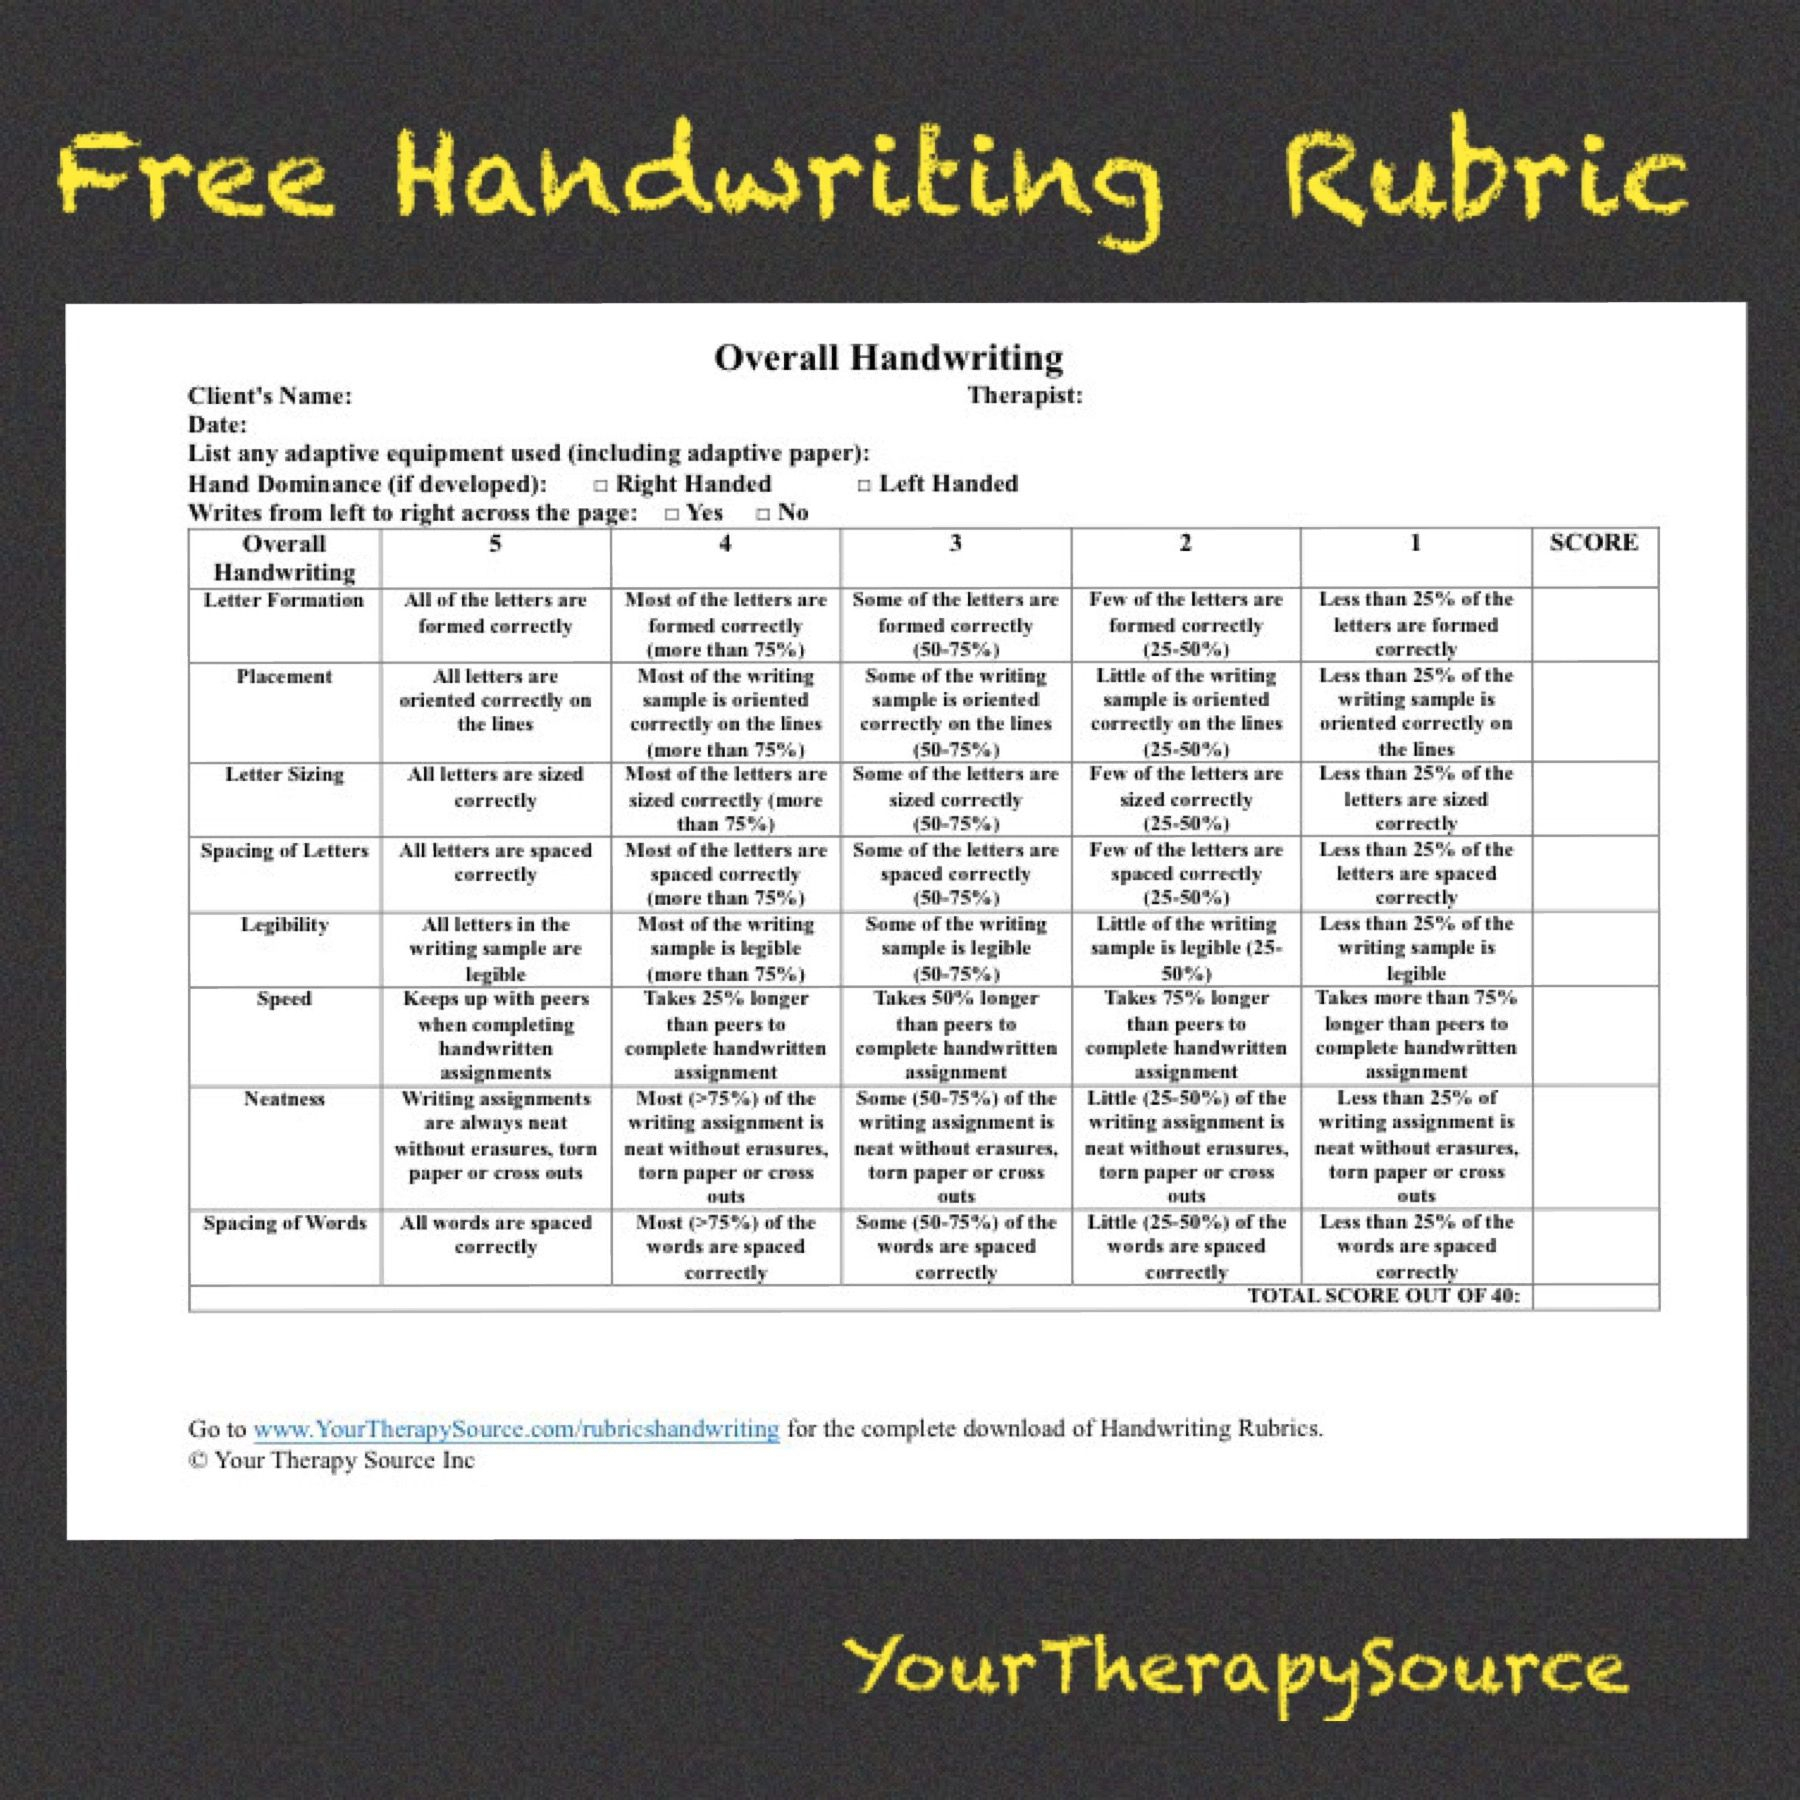 Overall Handwriting Rubric  Your Therapy Source | Free for Your Therapy Source Free